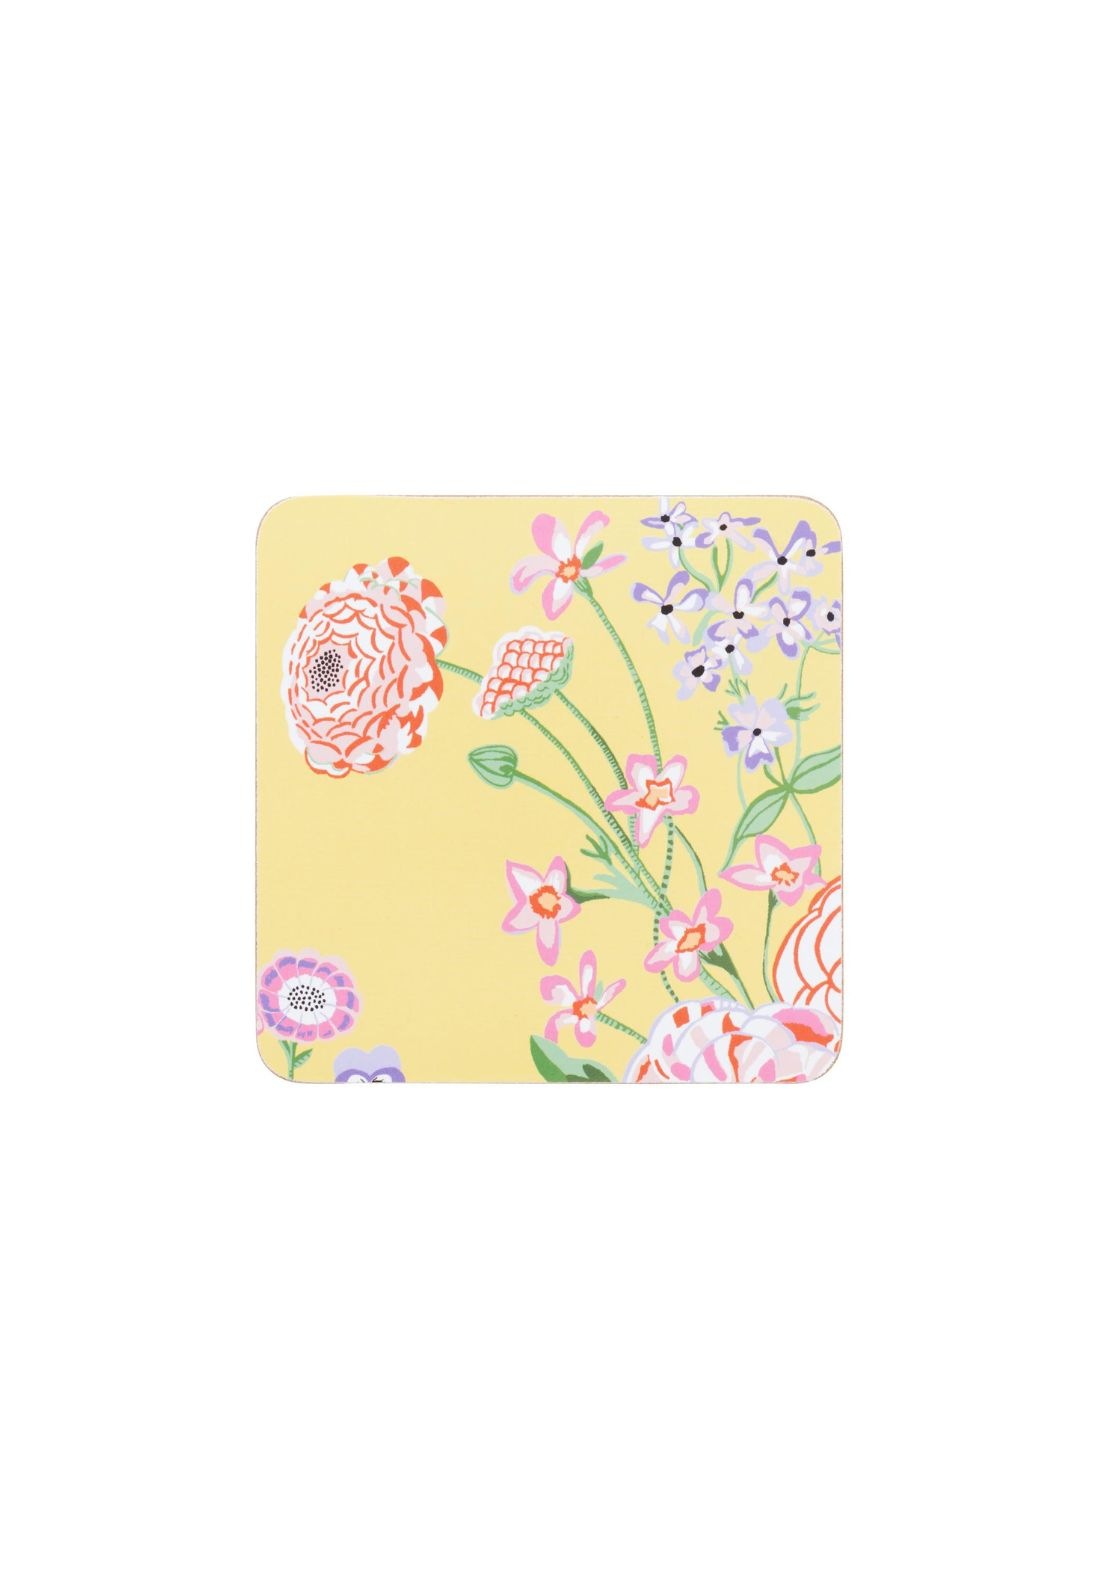 Cath Kidston Floral Fields 4 Pack Cork Back Coasters 1 Shaws Department Stores